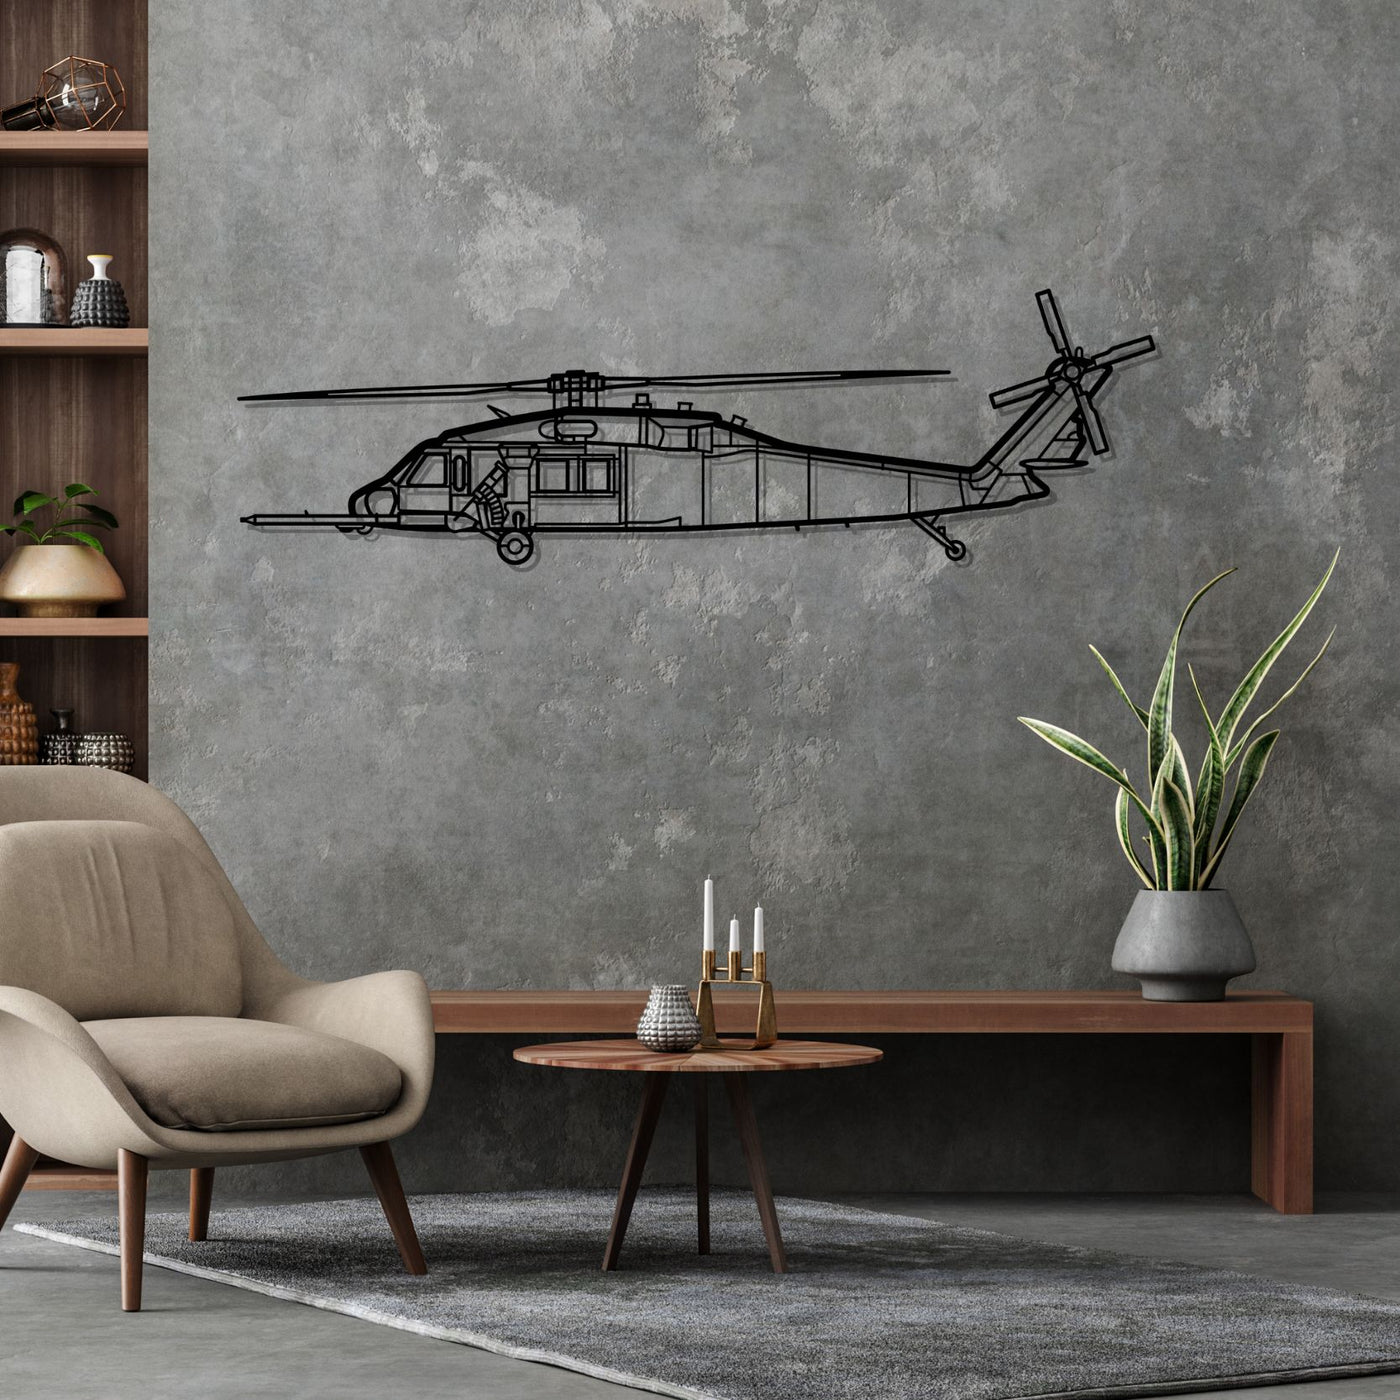 HH-60 Pave Hawk Silhouette Metal Wall Art